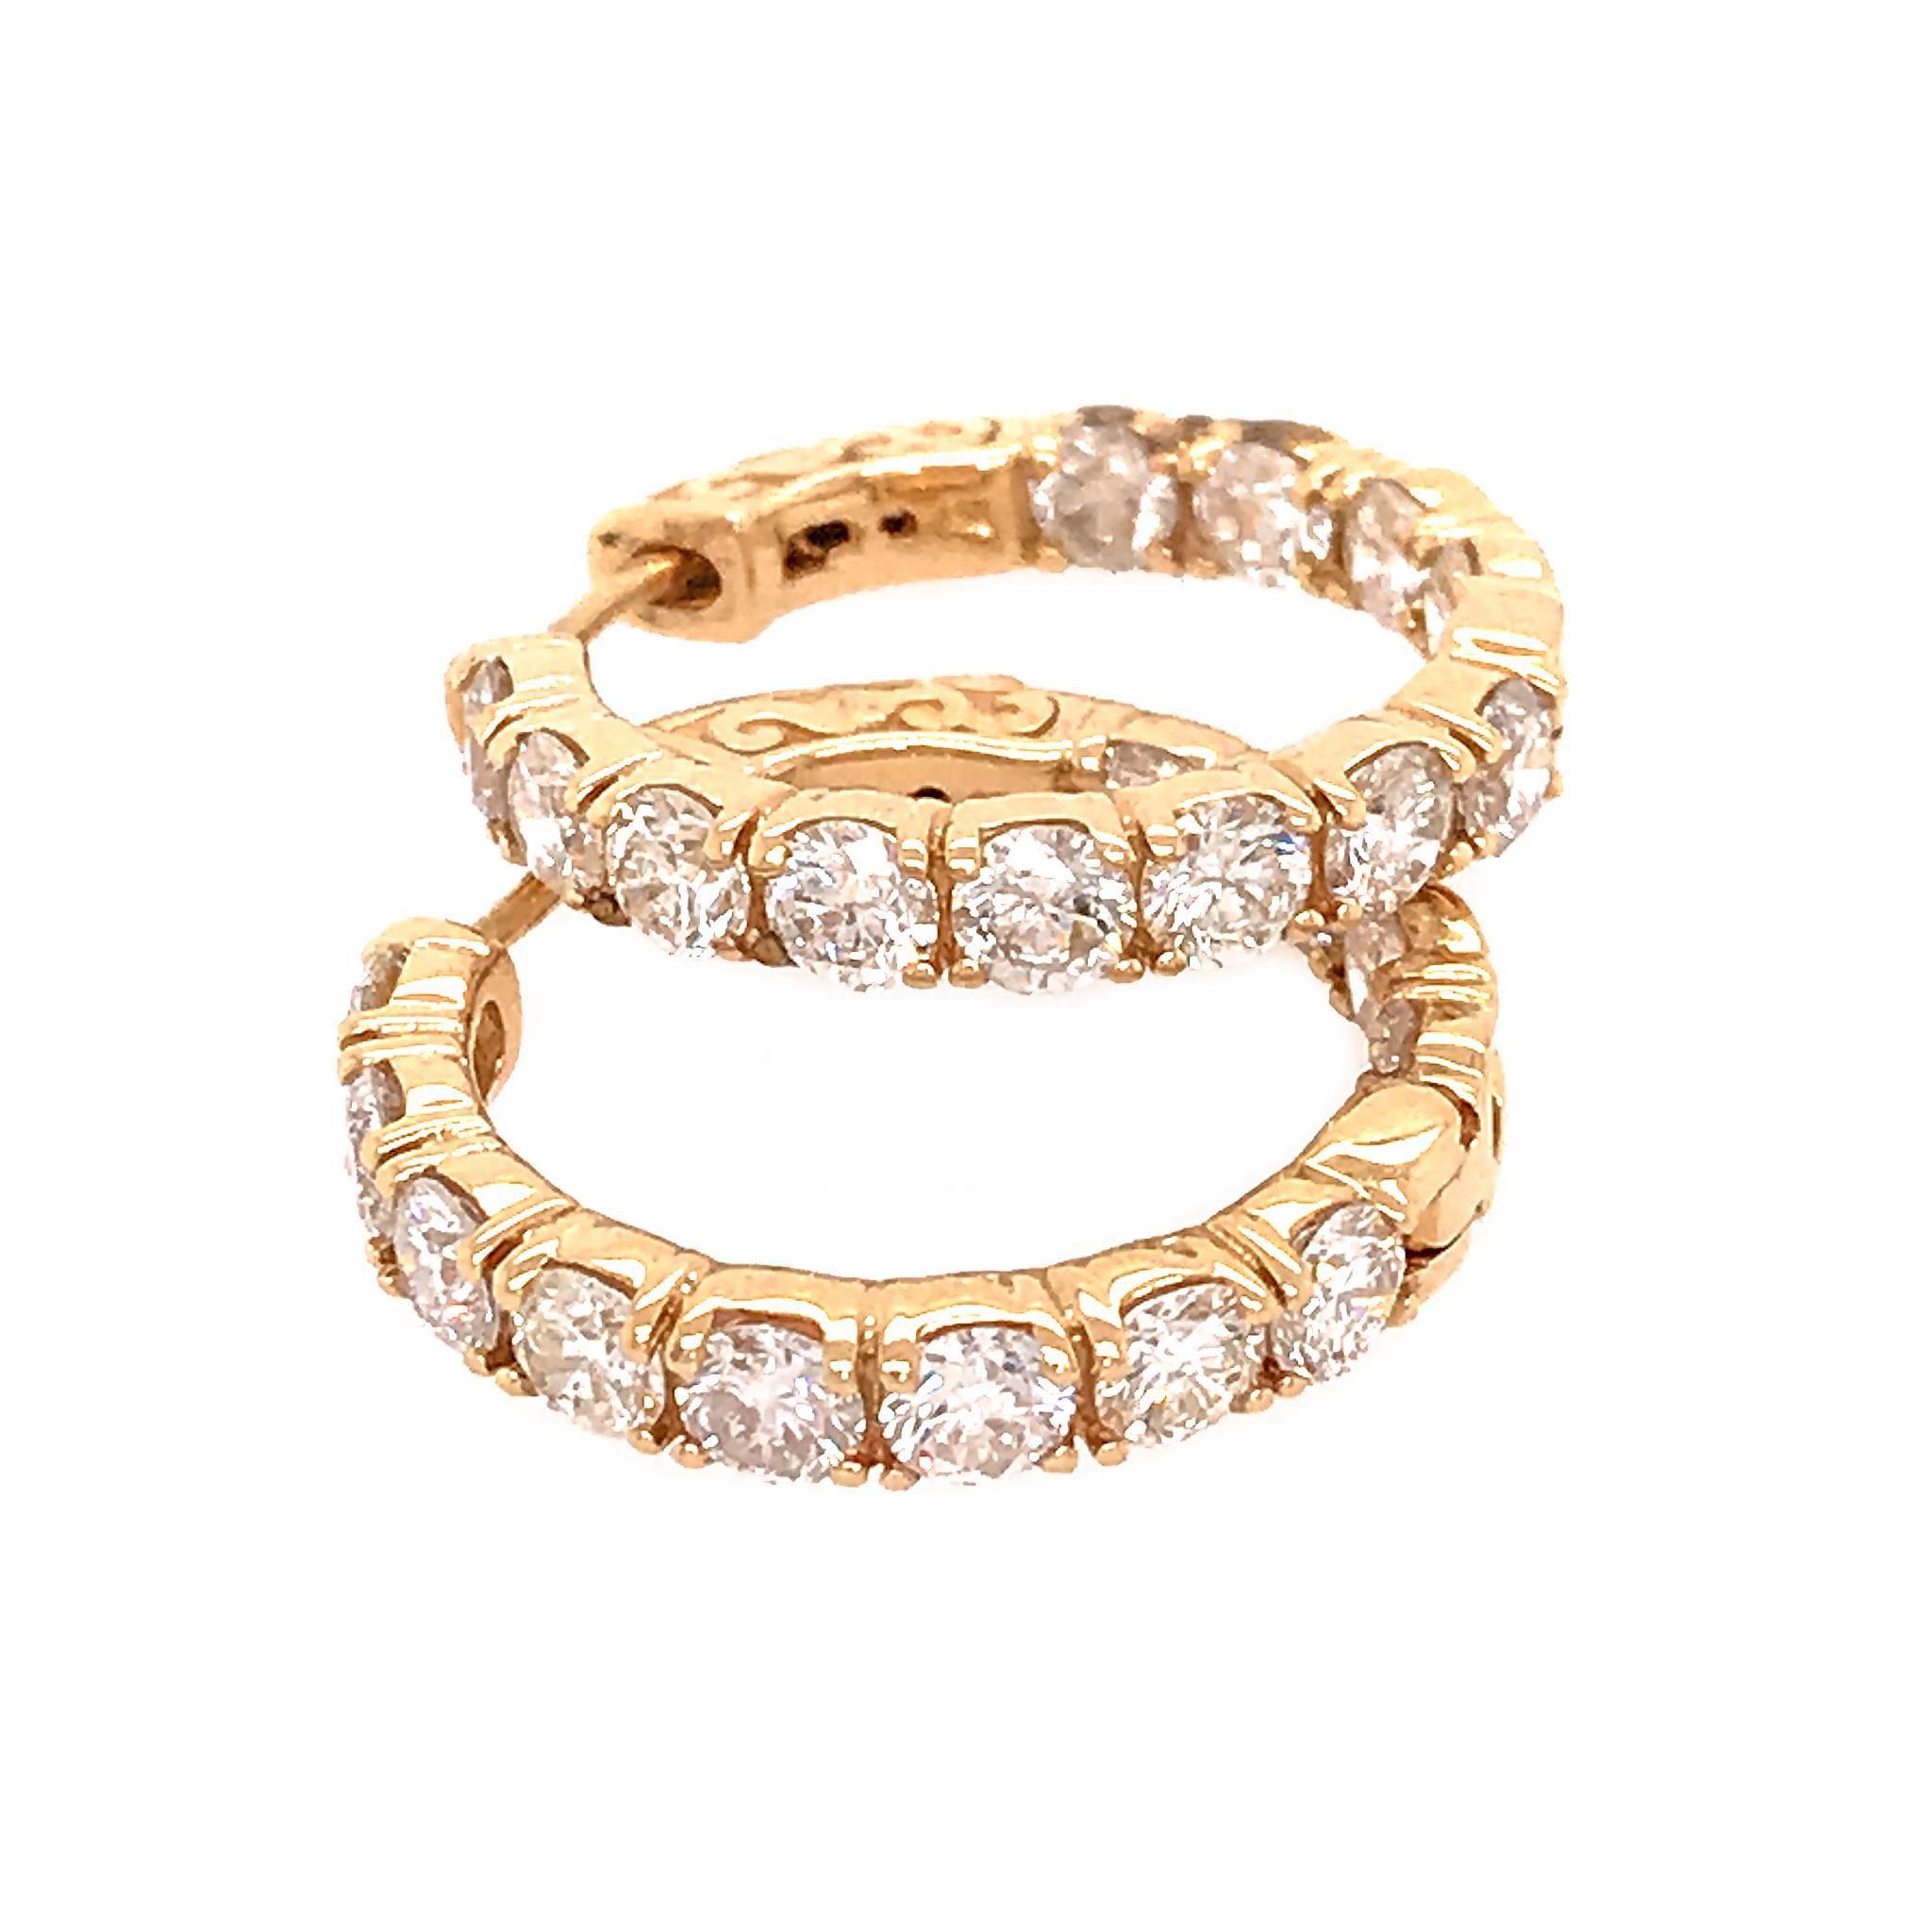 14K Yellow Gold
Length: 1.5 inches
Diamond: 3.31 ct twd